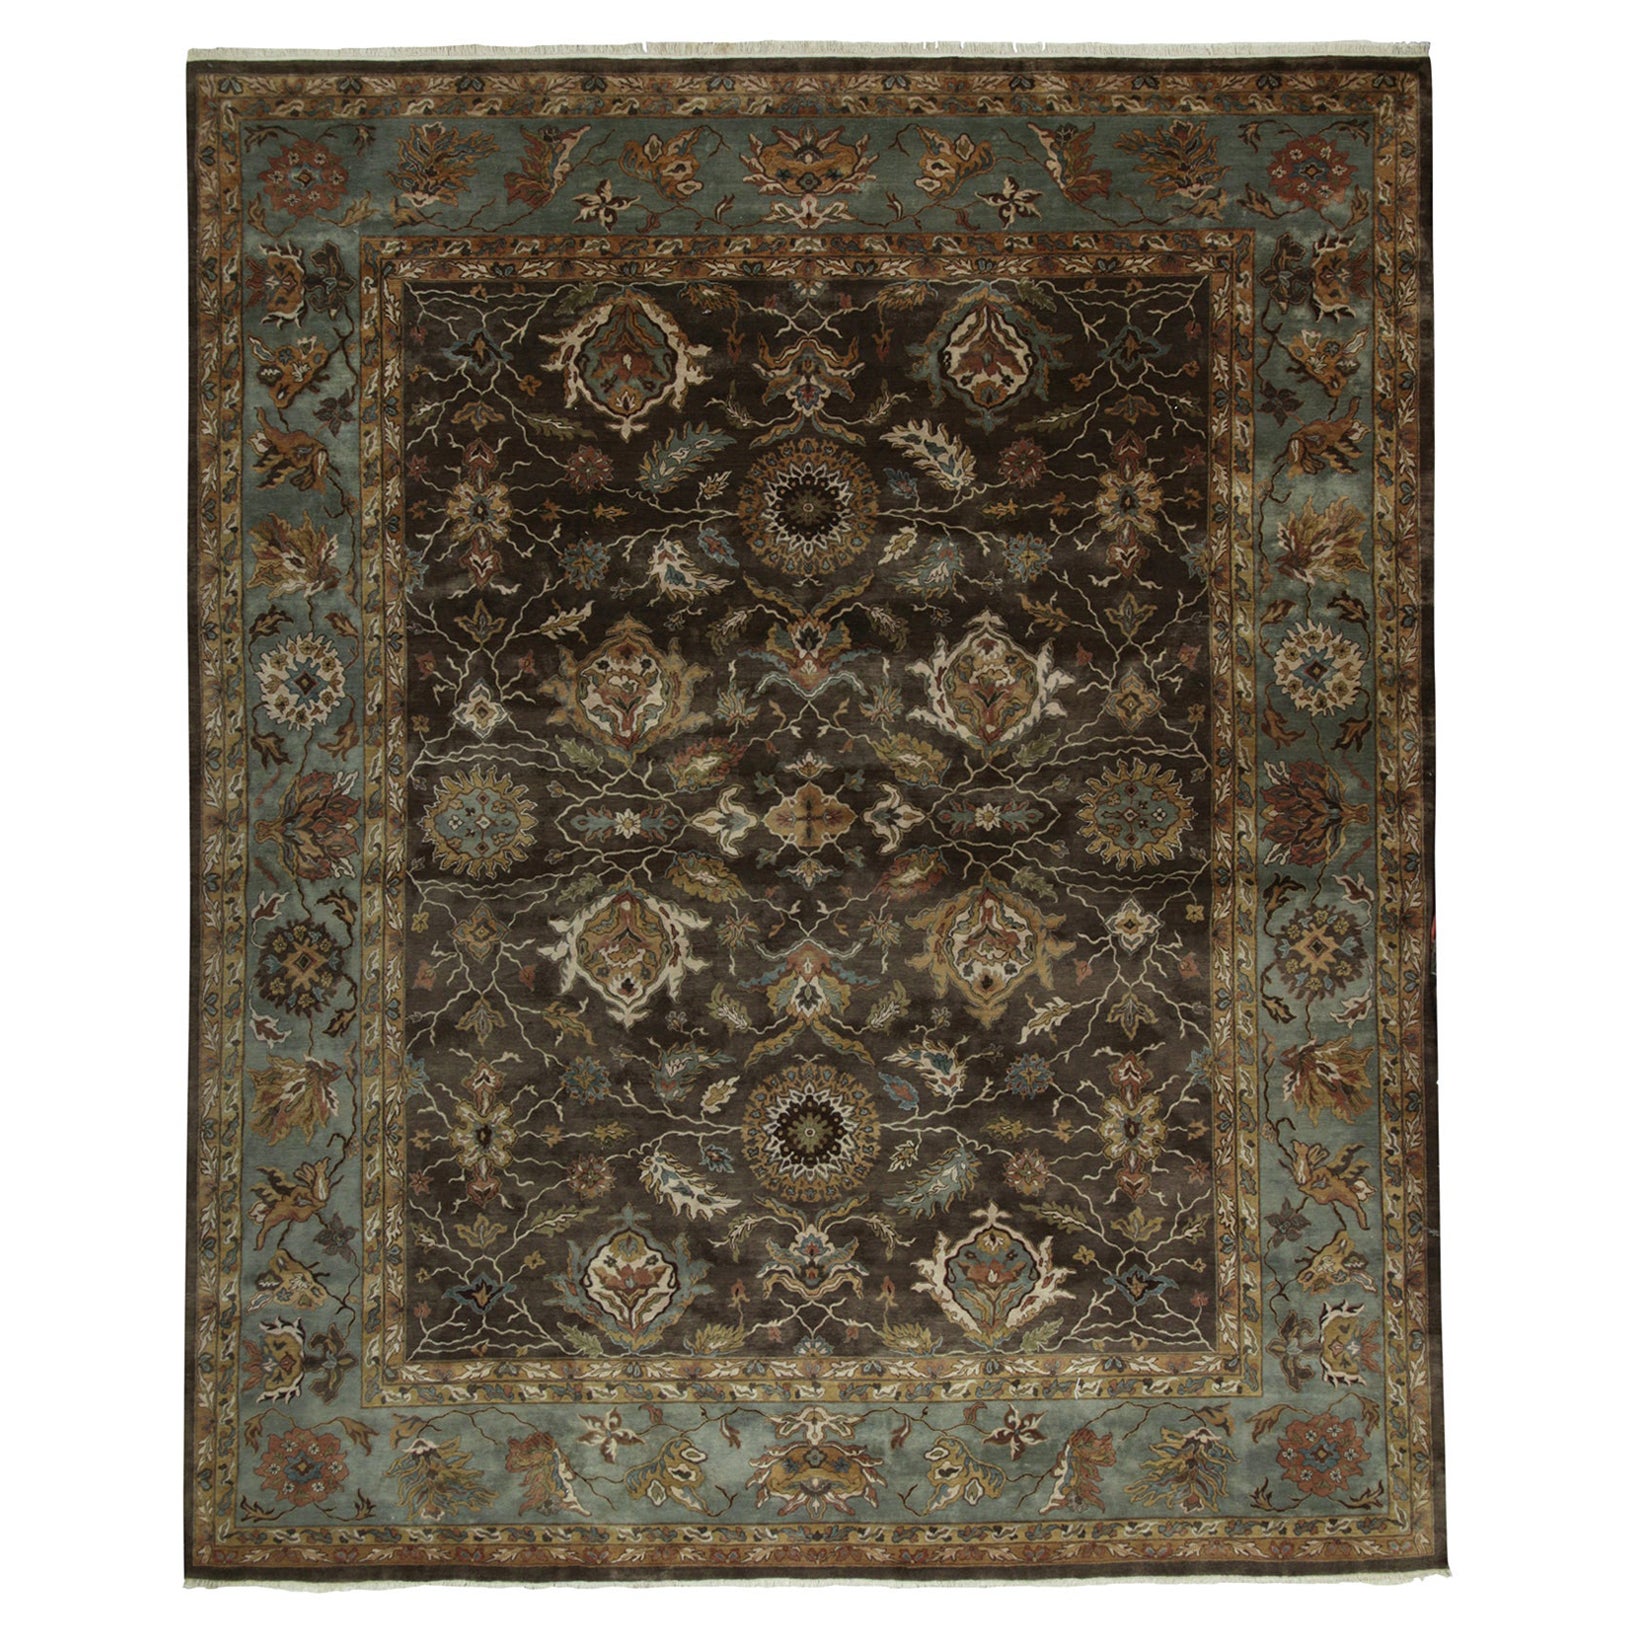 Rug & Kilim’s Classic Tabriz style rug in Brown, Blue and Gold Floral Patterns For Sale